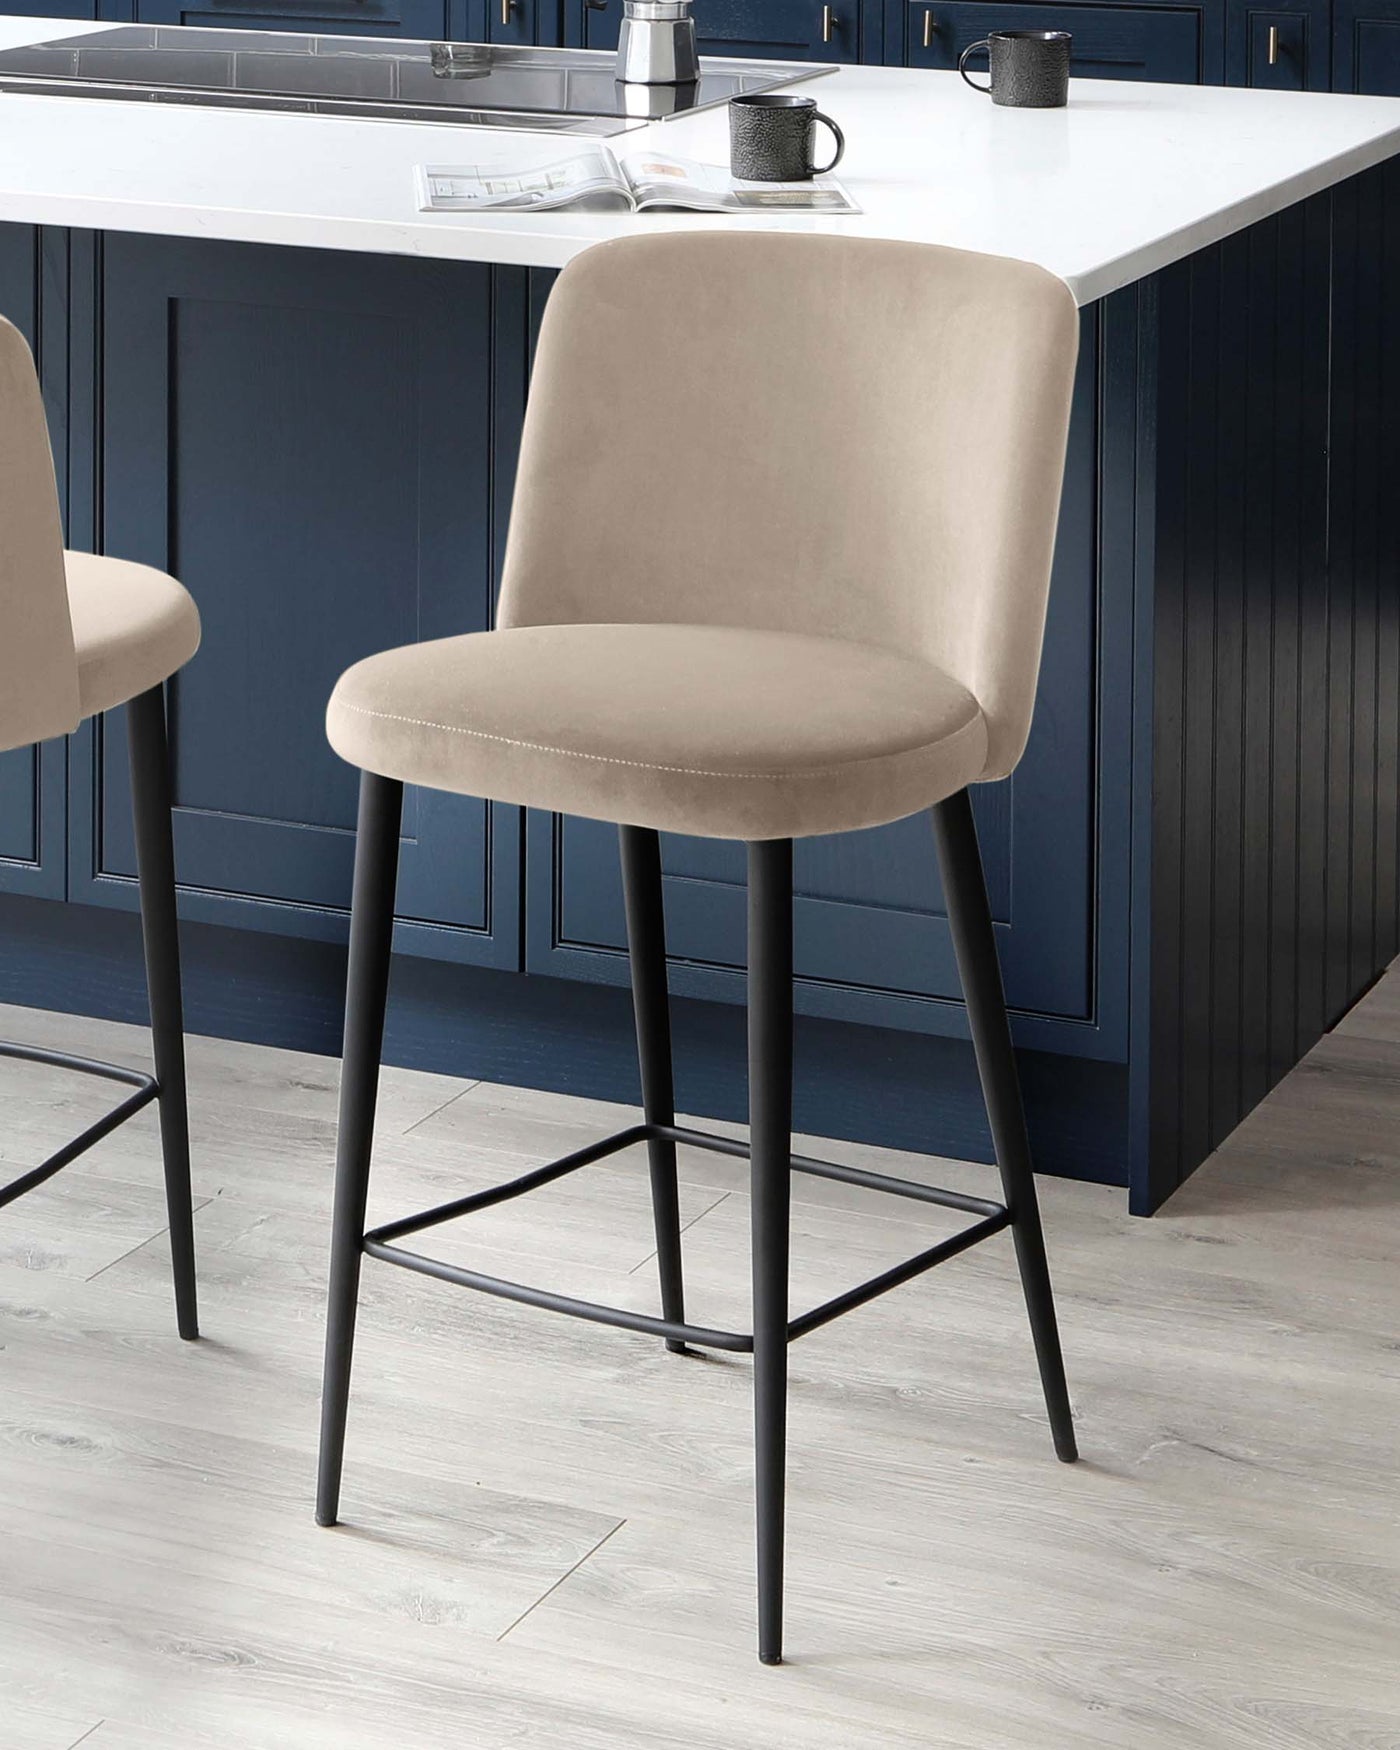 Two modern beige upholstered bar stools with sleek black metal legs, situated against a kitchen island with a white countertop and navy blue cabinetry.